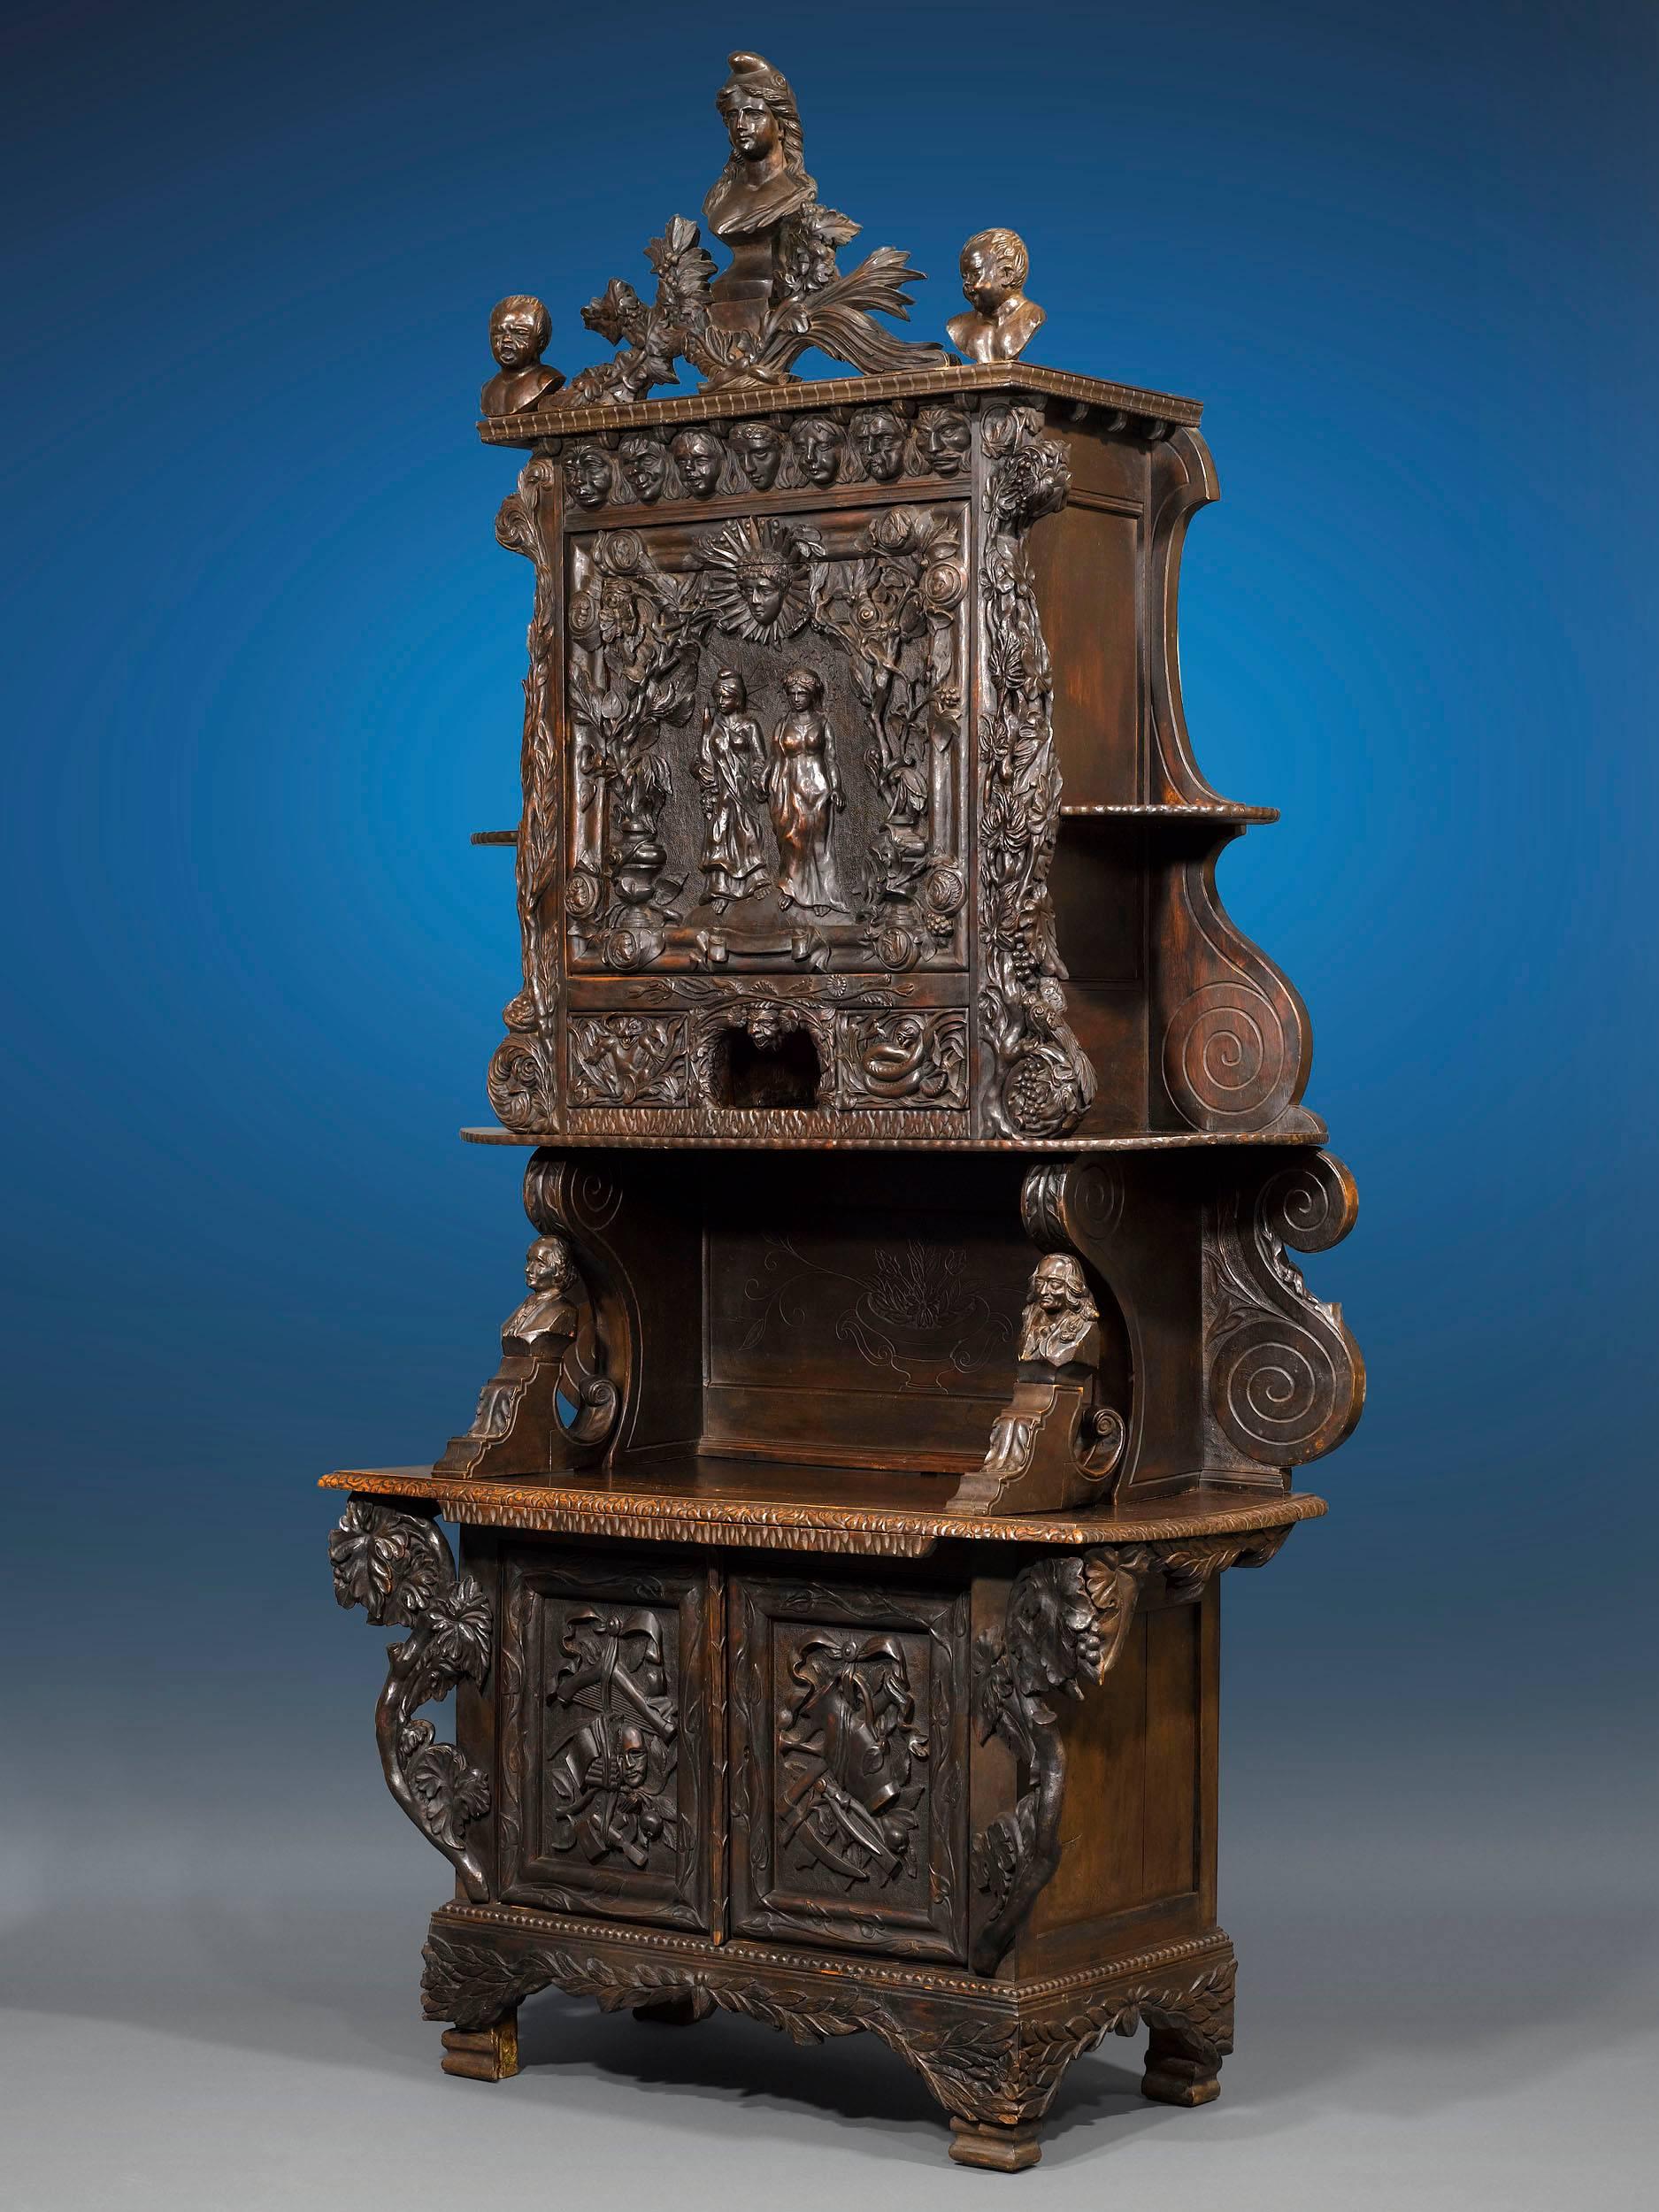 This beautifully carved America-France Liberty cabinet was created for the Louisiana State Exhibit at the 1904 St. Louis World’s Fair, also known as the Louisiana Purchase Exposition. Crafted of walnut, this cabinet celebrates both the special